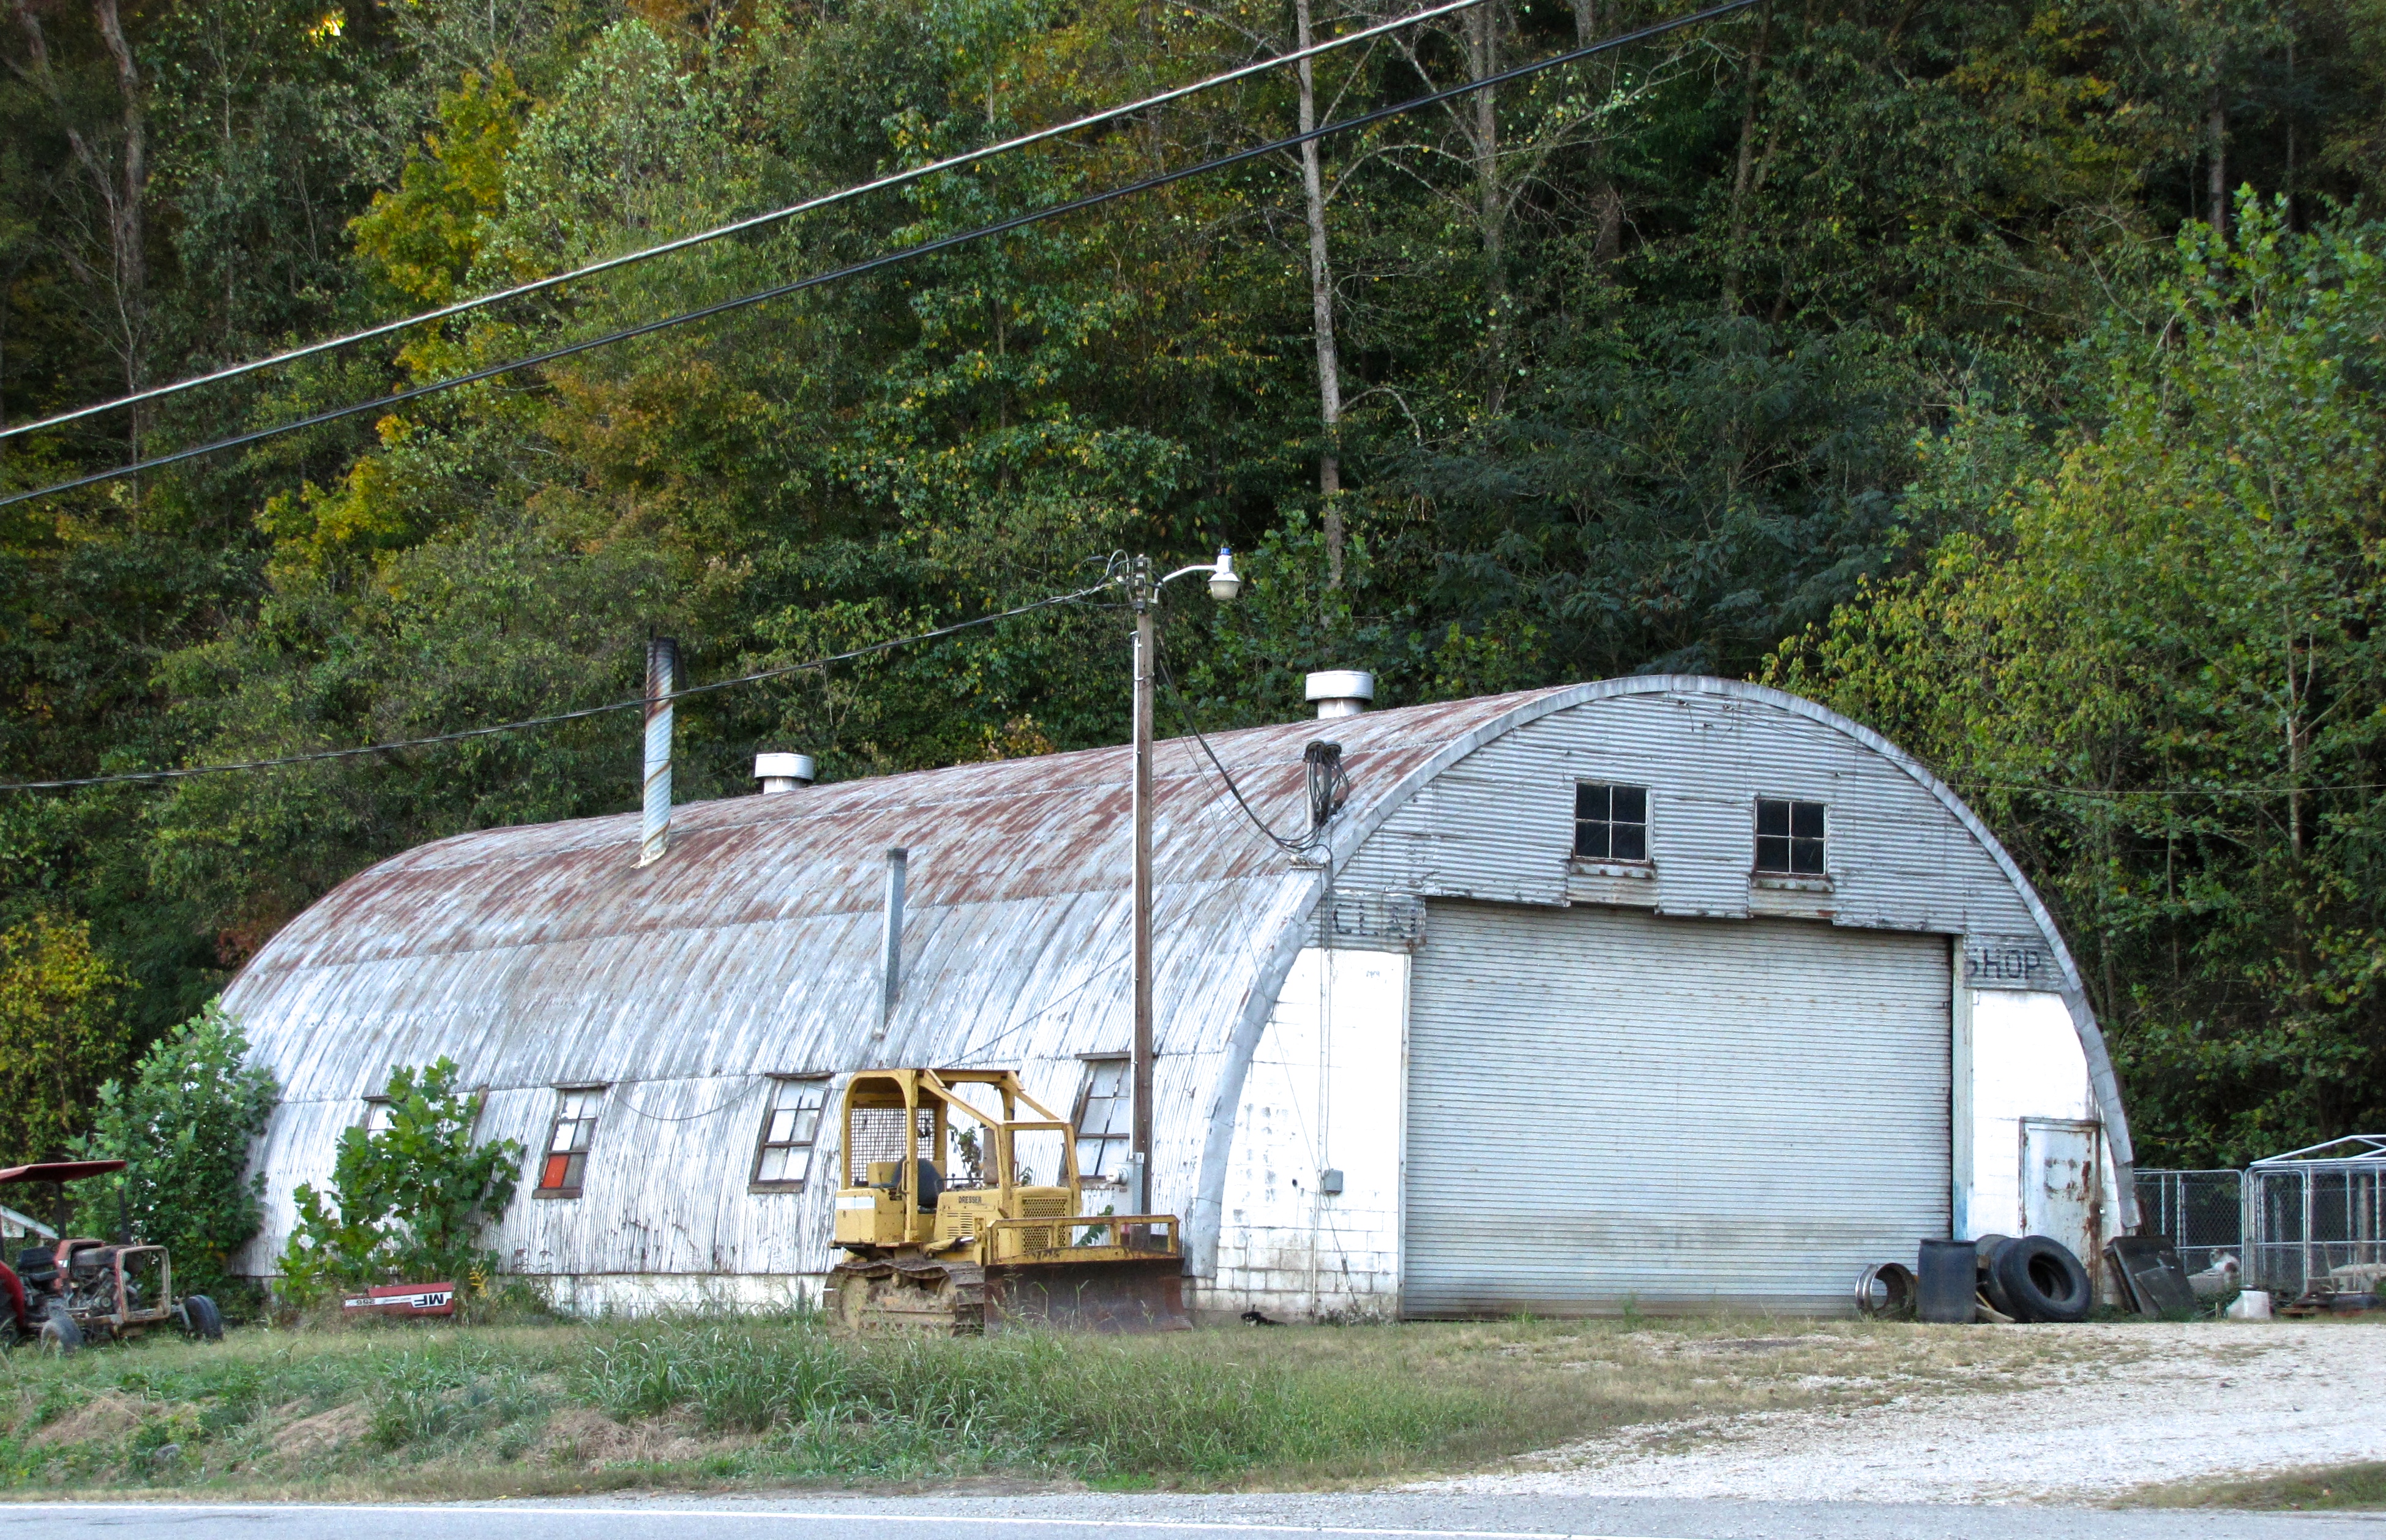 quonset hut in Nicholasville, KY